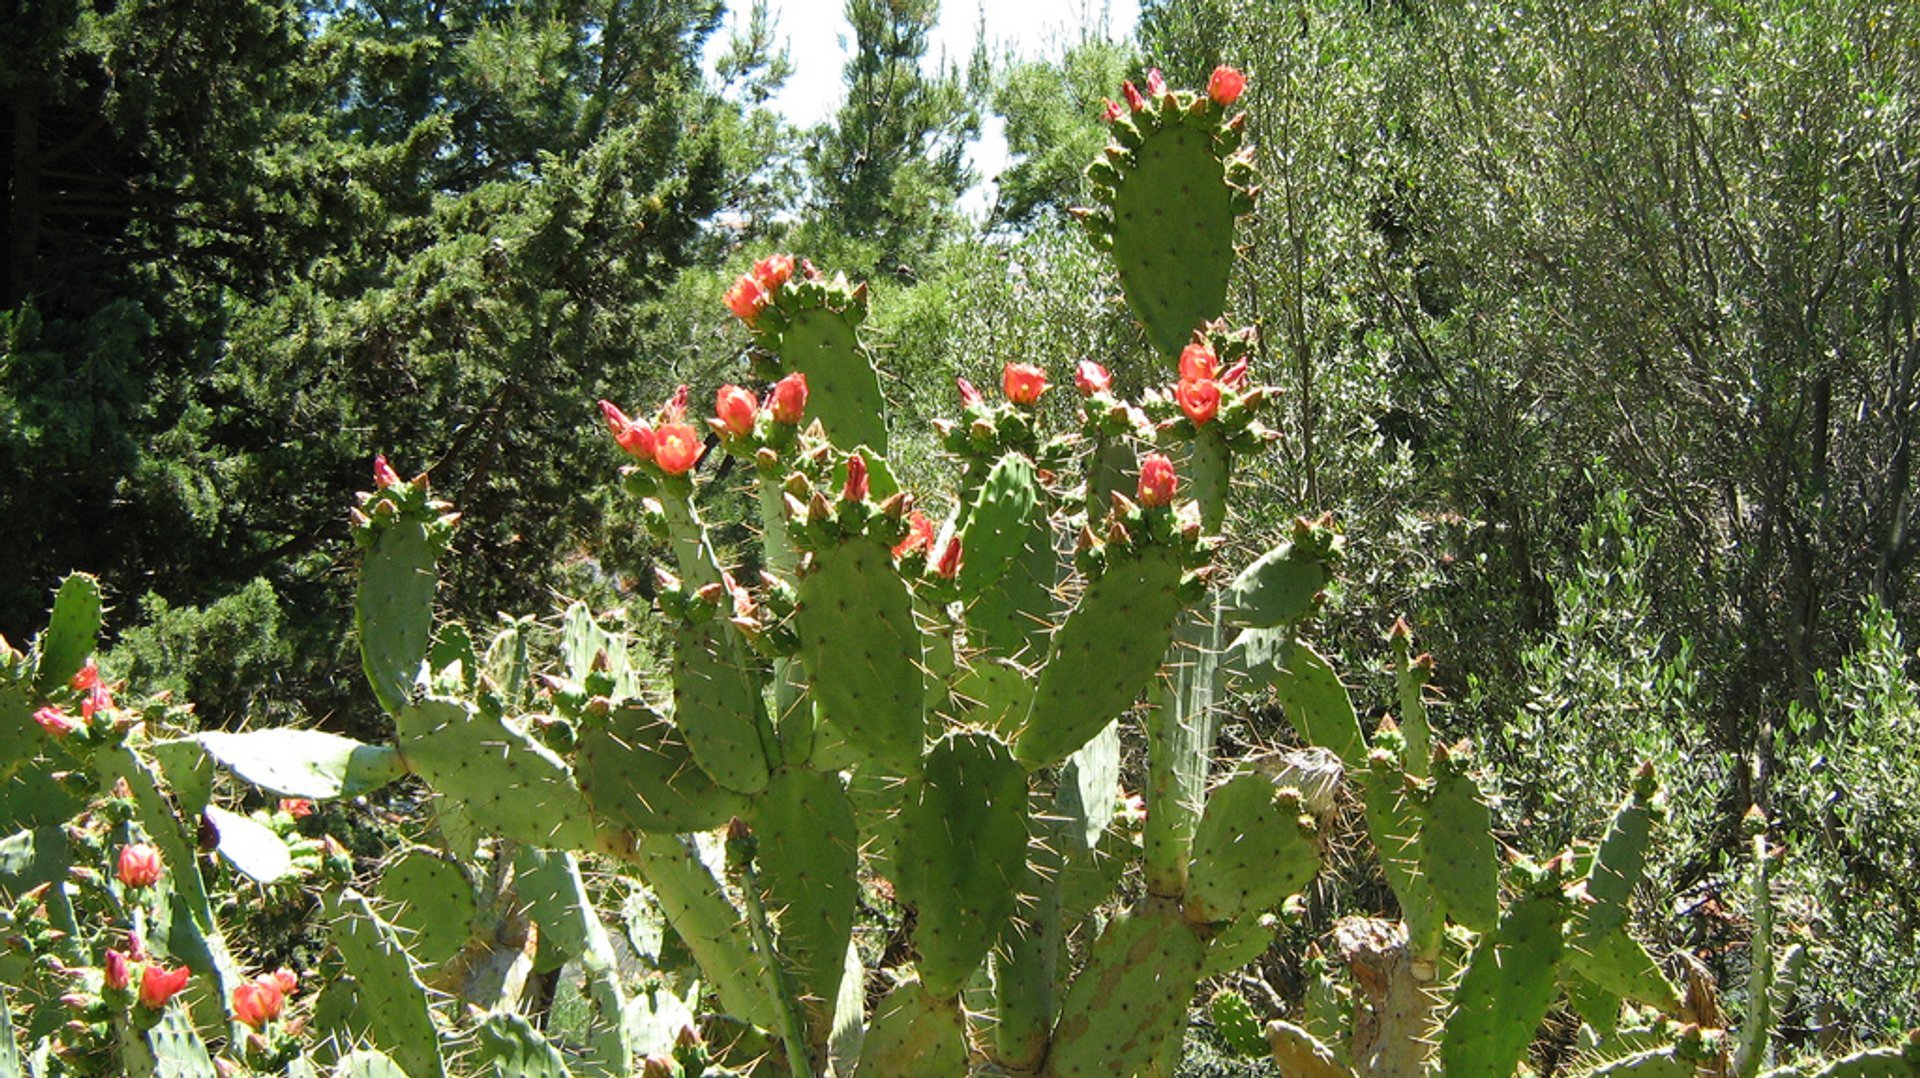 Opuntia or Prickly Pear